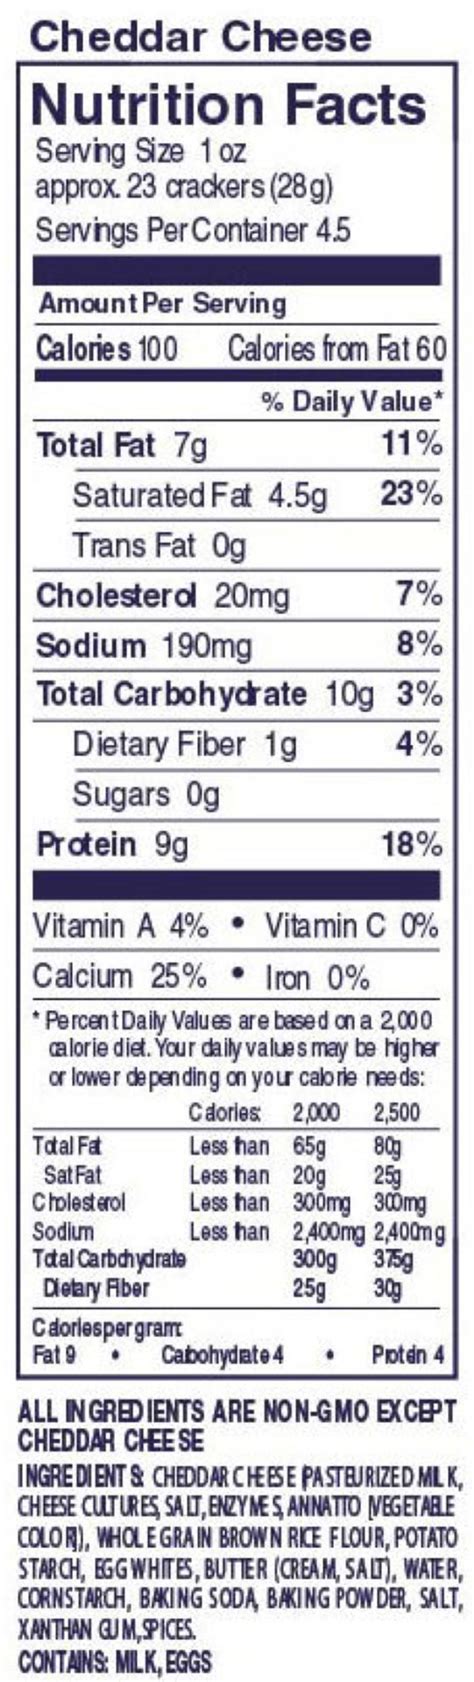 Cheddar Cheese Nutrition Facts Label